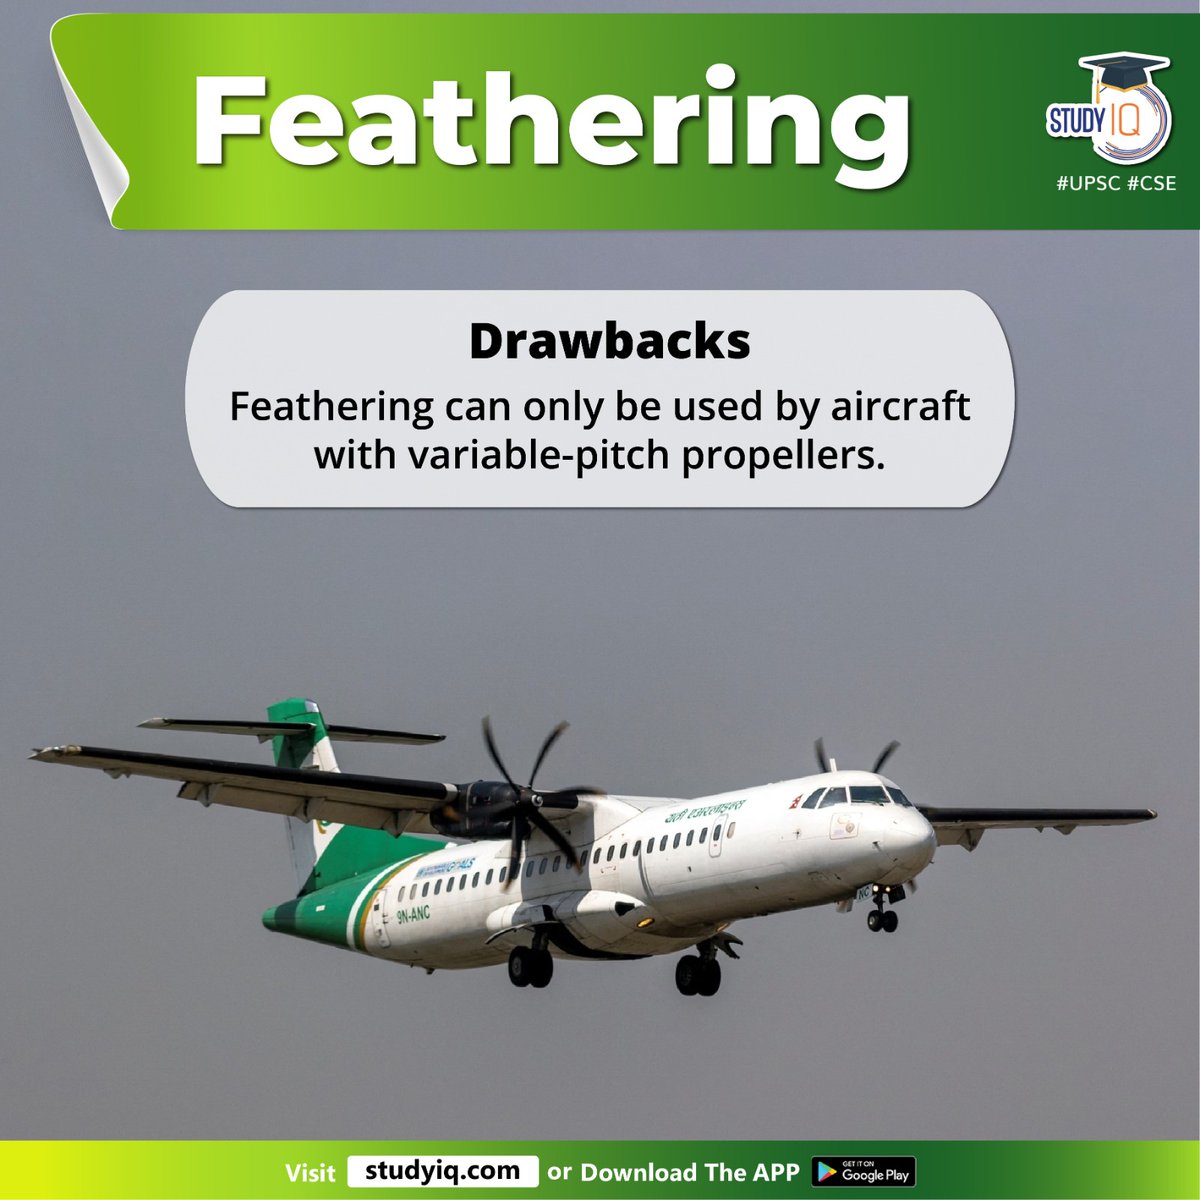 Feathering

#feathering #whyinnews #nepal #yetiarilines #featheredposition #pilot #parallelmotion #aircrafts #windmilling #aircraftengines #enginesexperience #midairplanes #nepalairlines #upsc #cse #ips #ias #worldaffairs